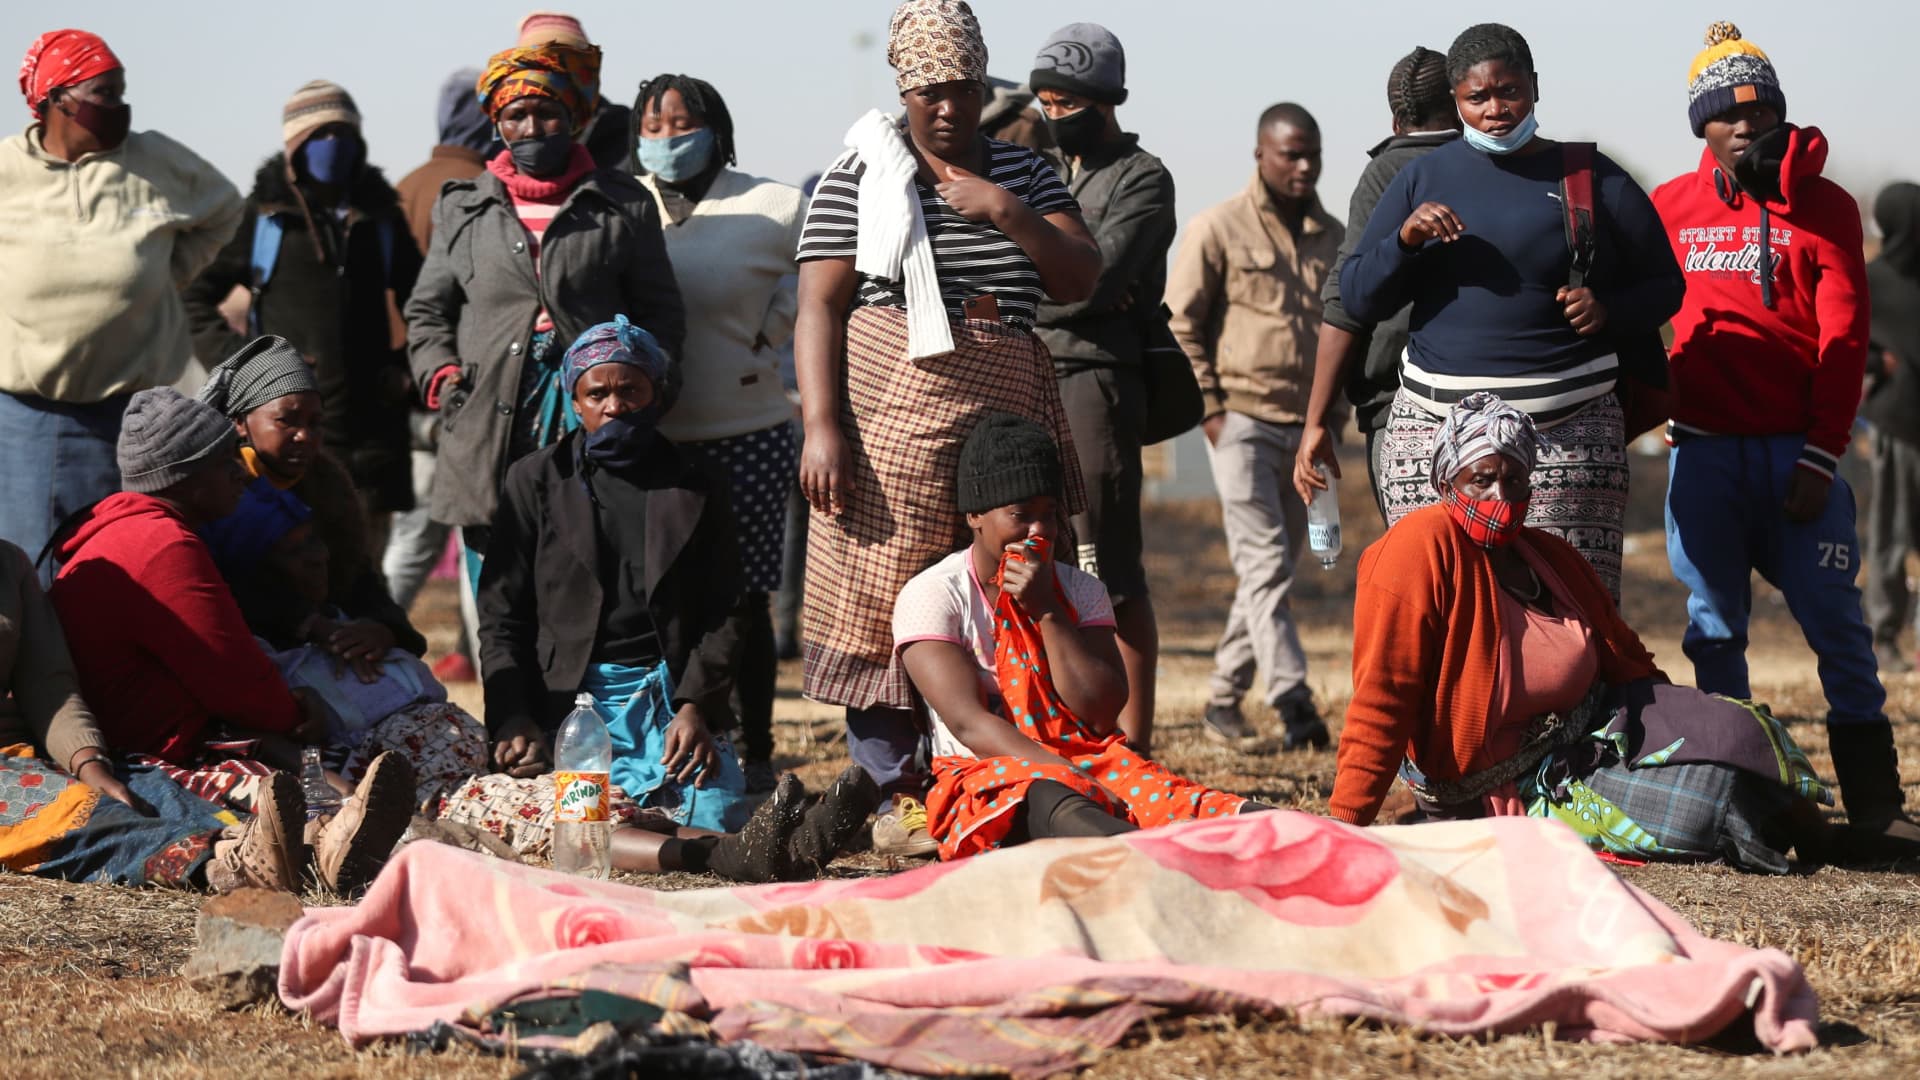 Locals and family members of 15-year-old Vusi Dlamini stand next to his body after he has been allegedly shot outside a mall where looting was taking place, as the country deploys army to quell unrest linked to the jailing of former South African President Jacob Zuma, in Vosloorus, South Africa, July 14, 2021.